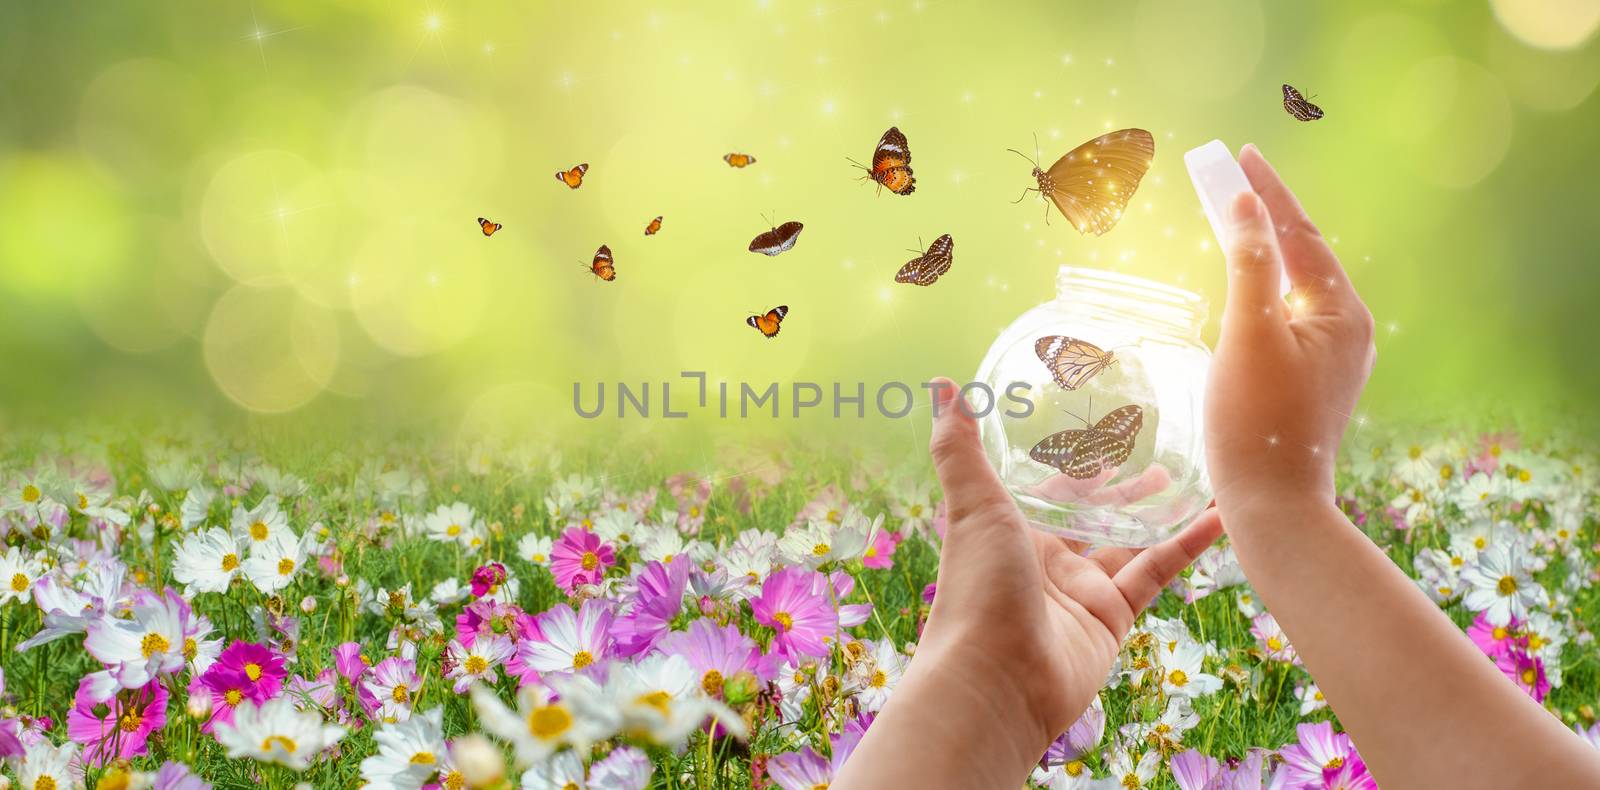 The girl frees the butterfly from the jar, golden blue moment Concept of freedom